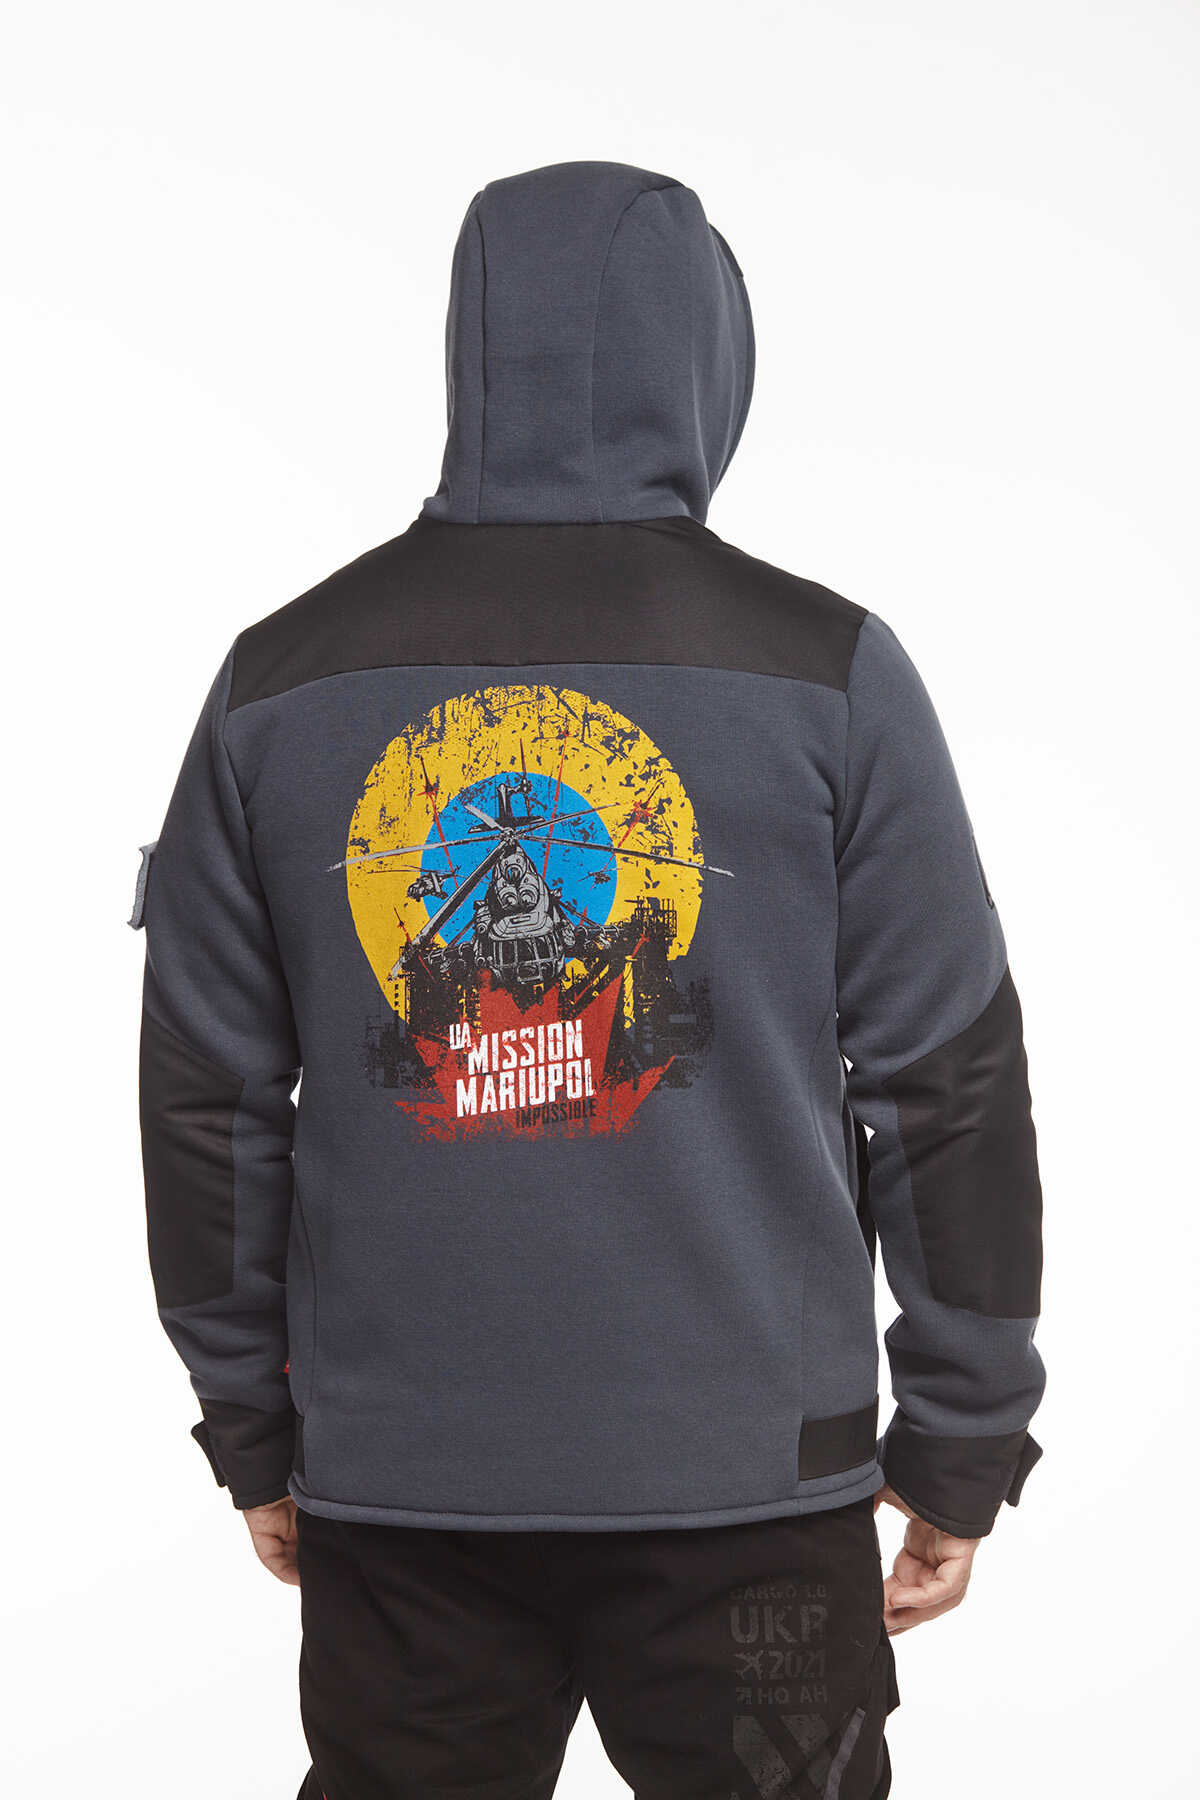 Men's Hoodie Mission Mariupol. Color graphite. 
Technique of prints applied: silkscreen printing.